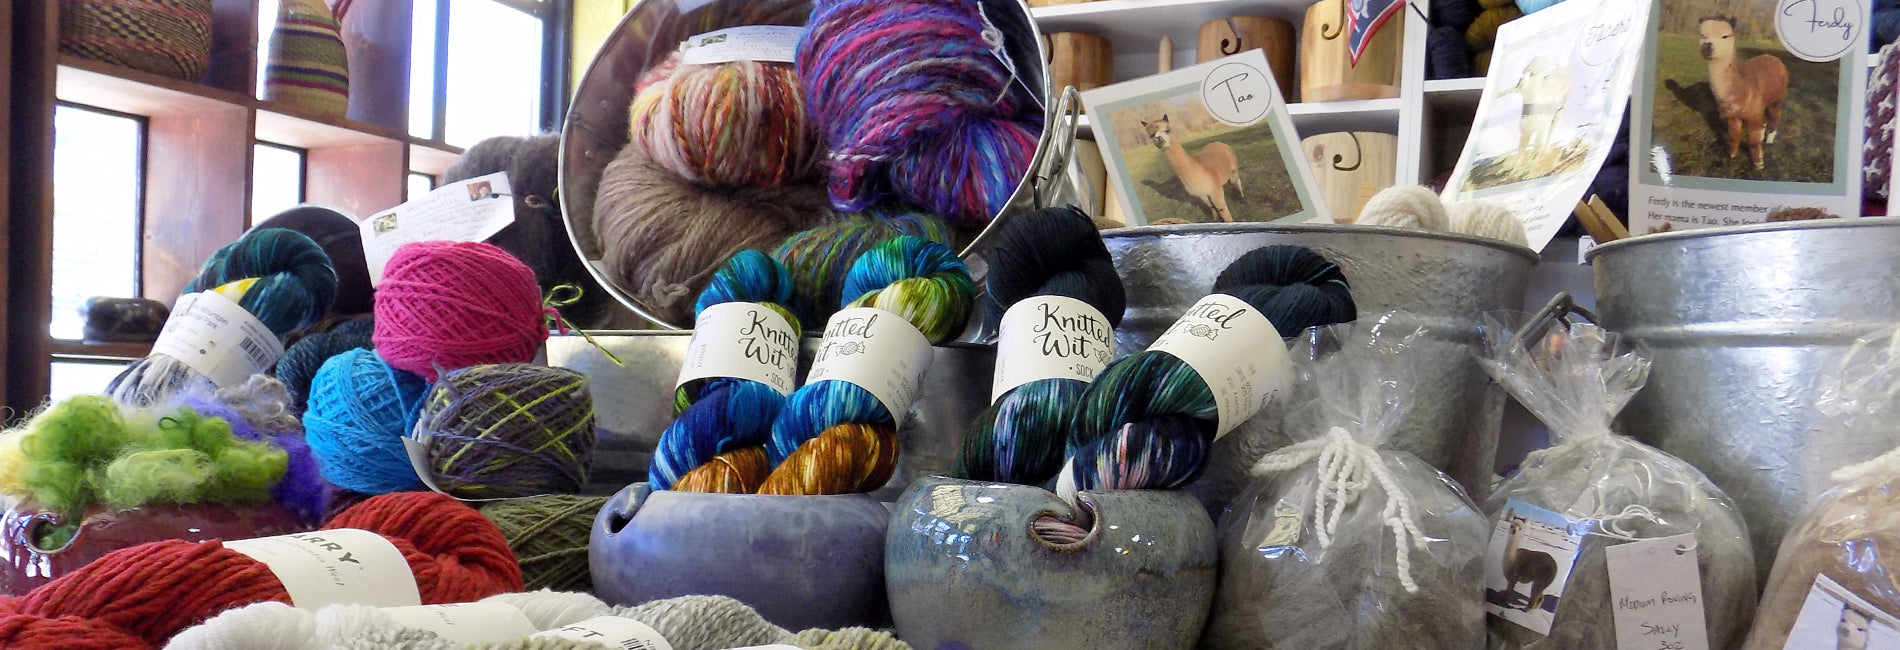 Where to Find the Best Online Yarn Sales